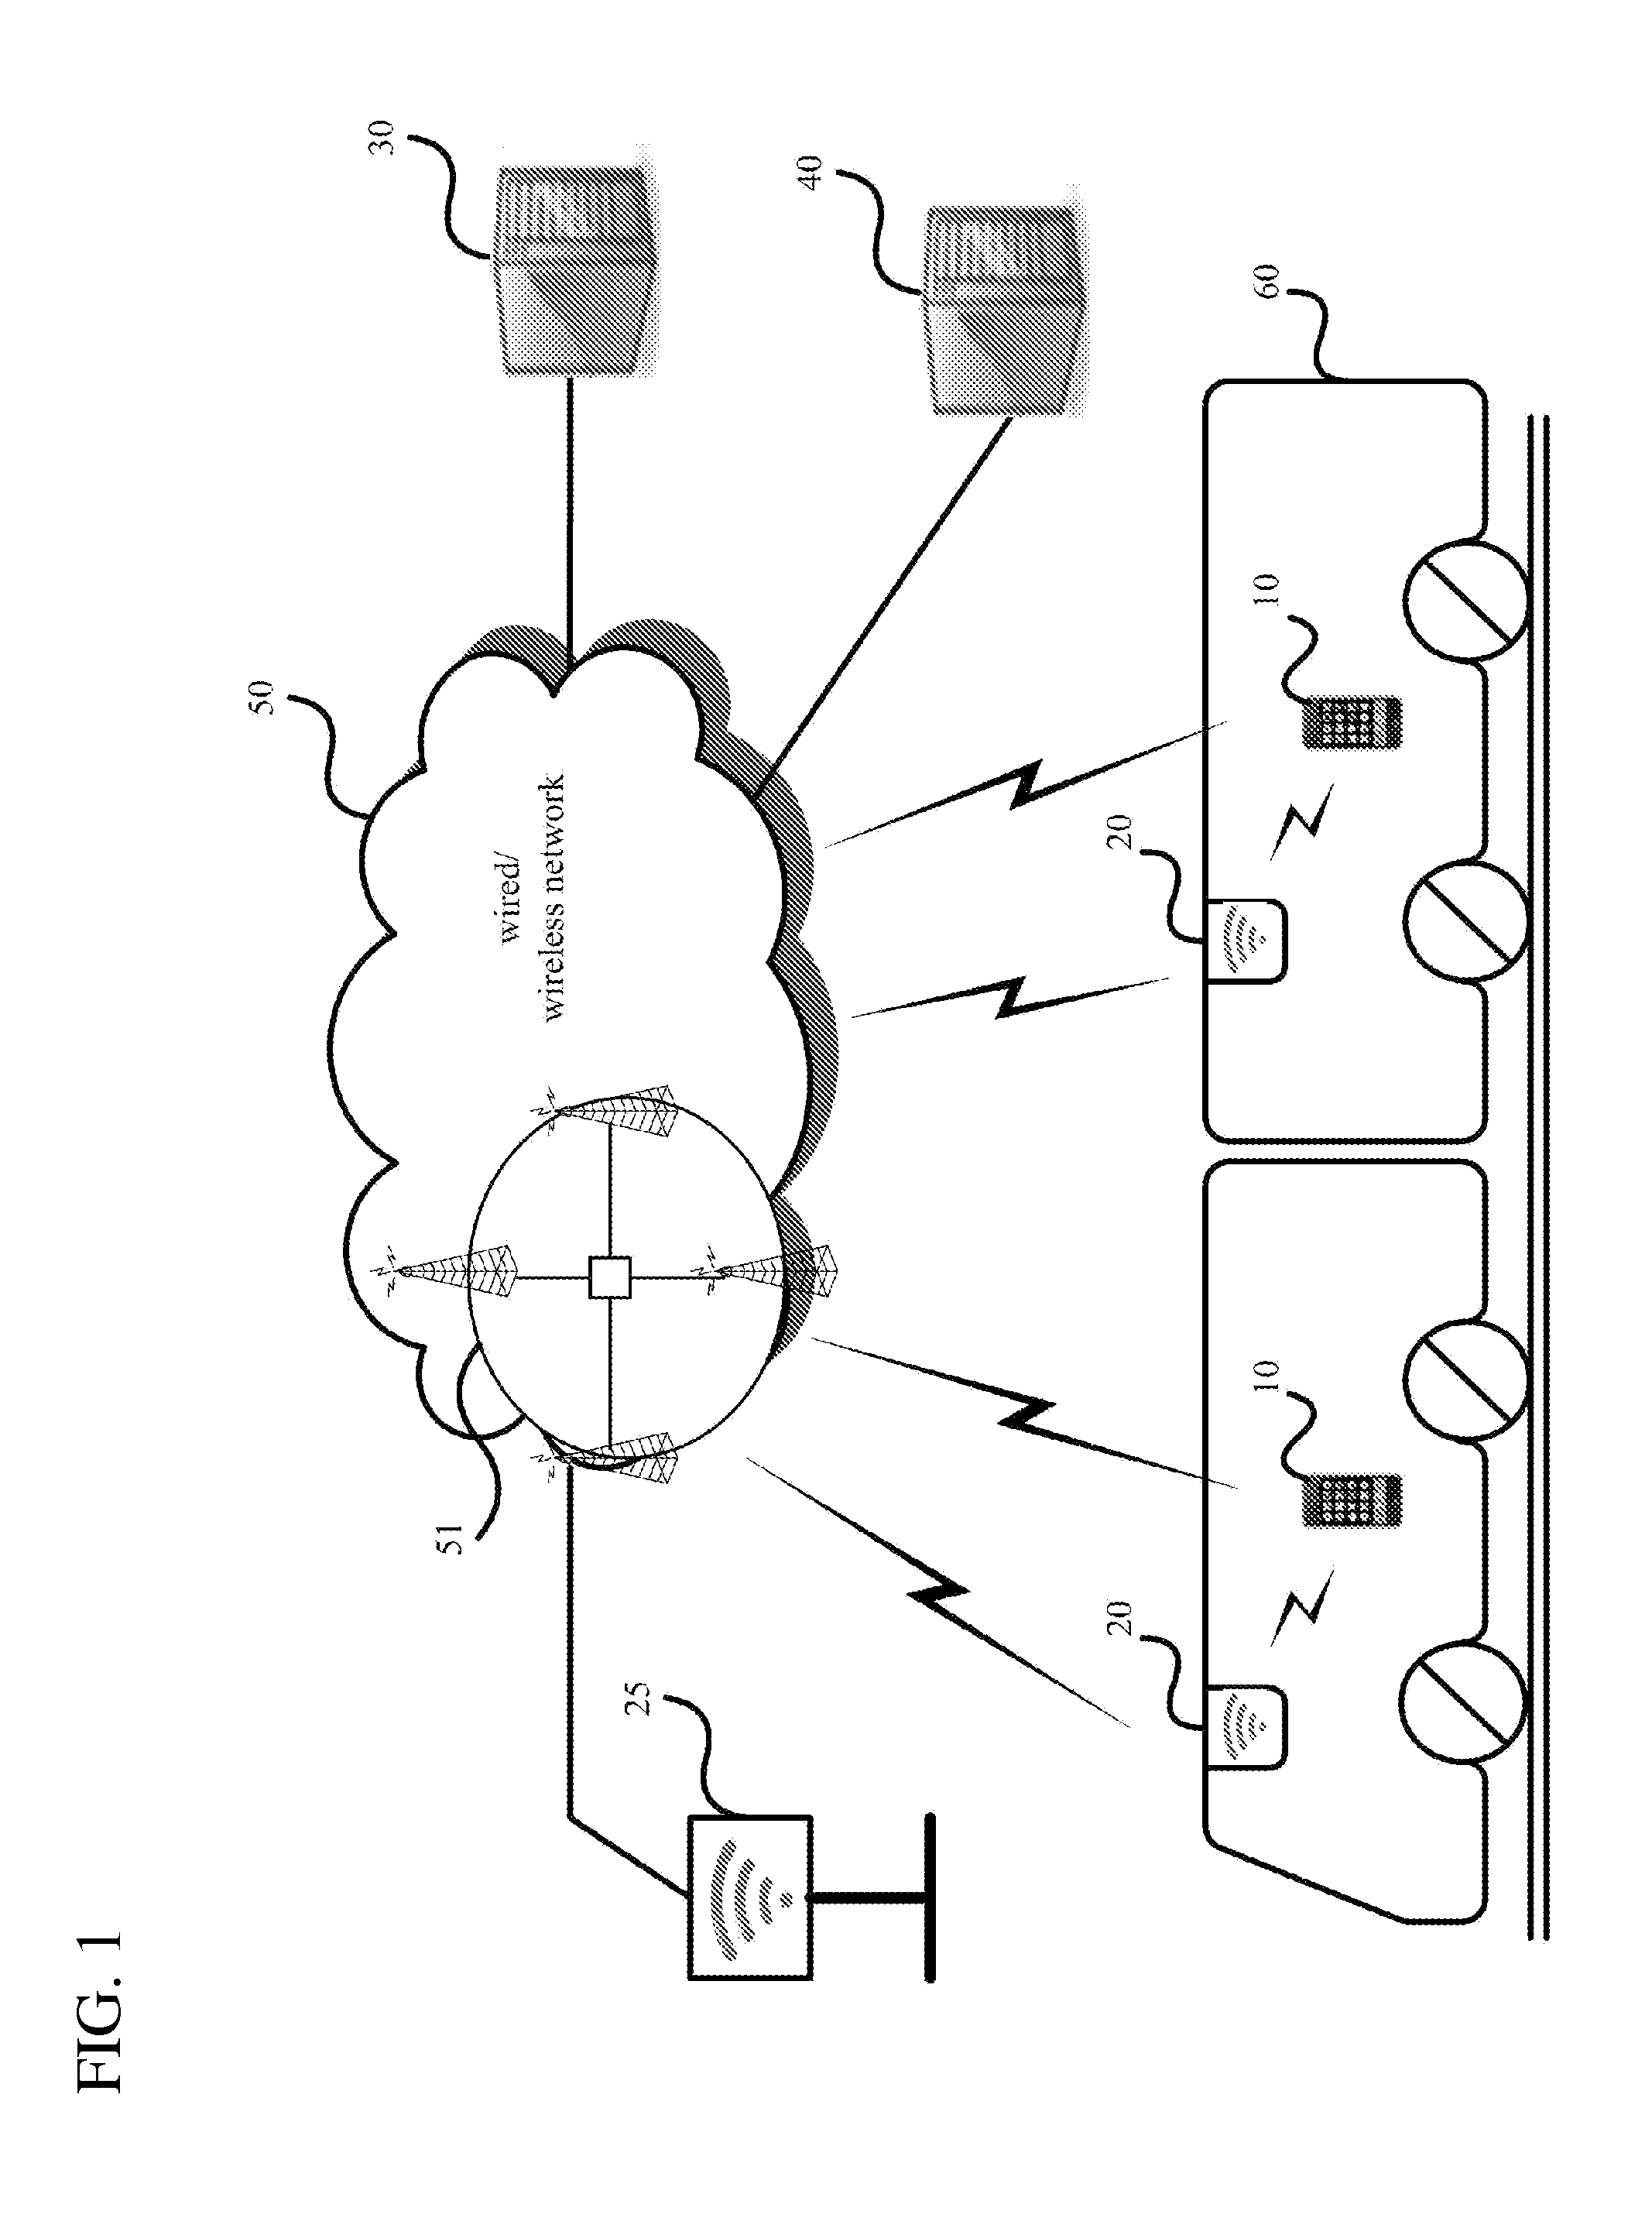 METHOD OF ESTIMATING LOCATION OF MOBILE DEVICE IN TRANSPORTATION USING WiFi